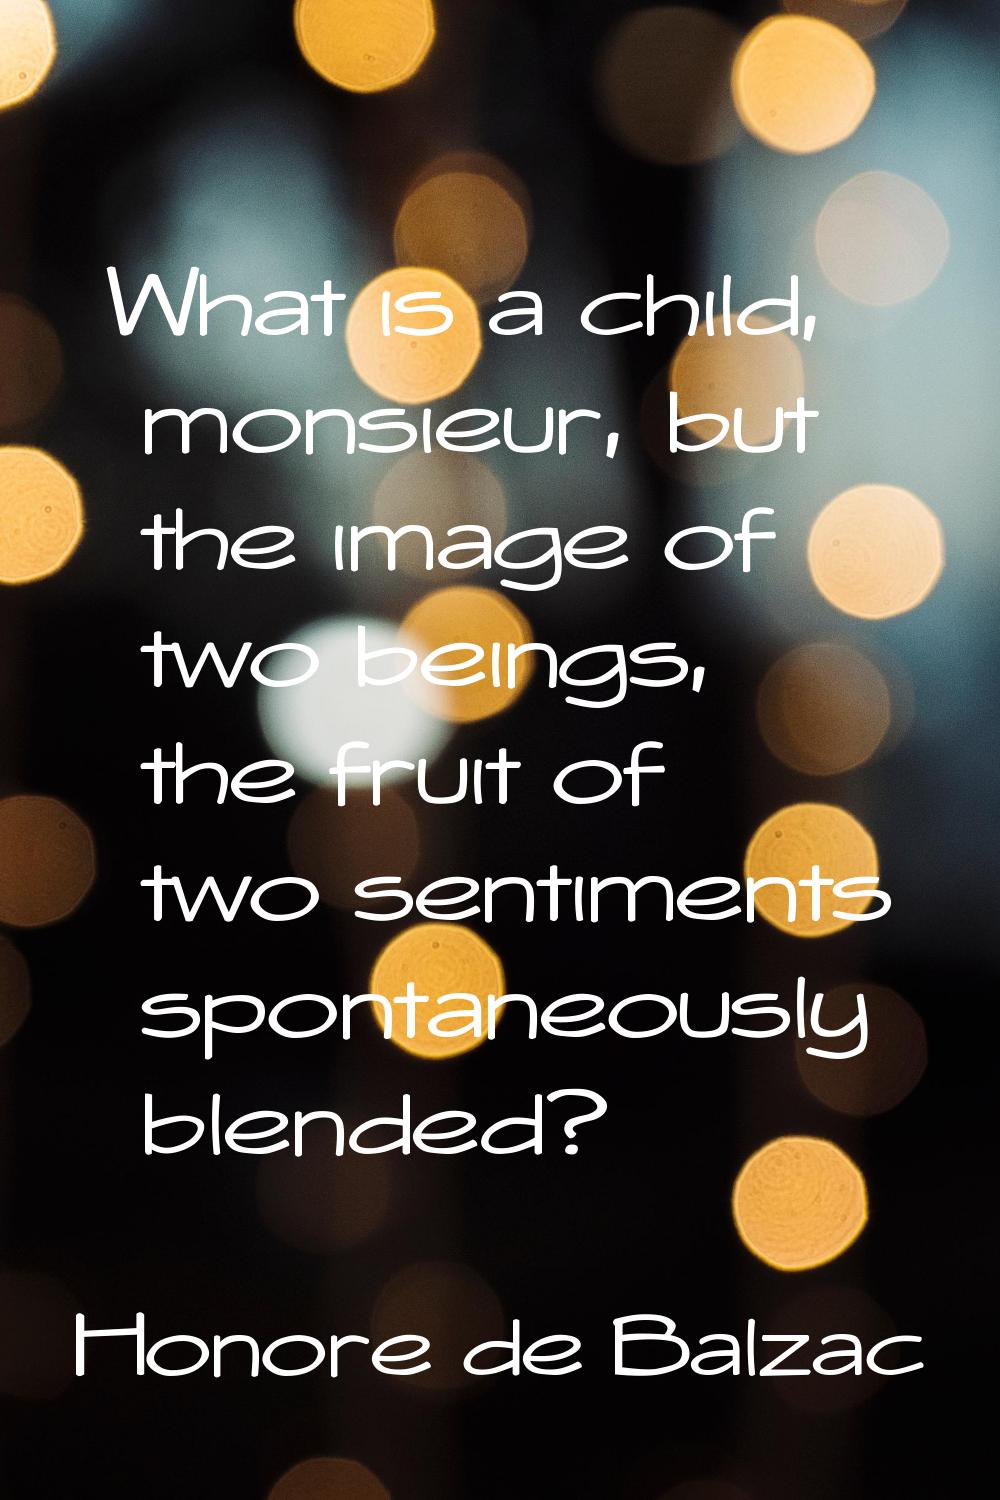 What is a child, monsieur, but the image of two beings, the fruit of two sentiments spontaneously b